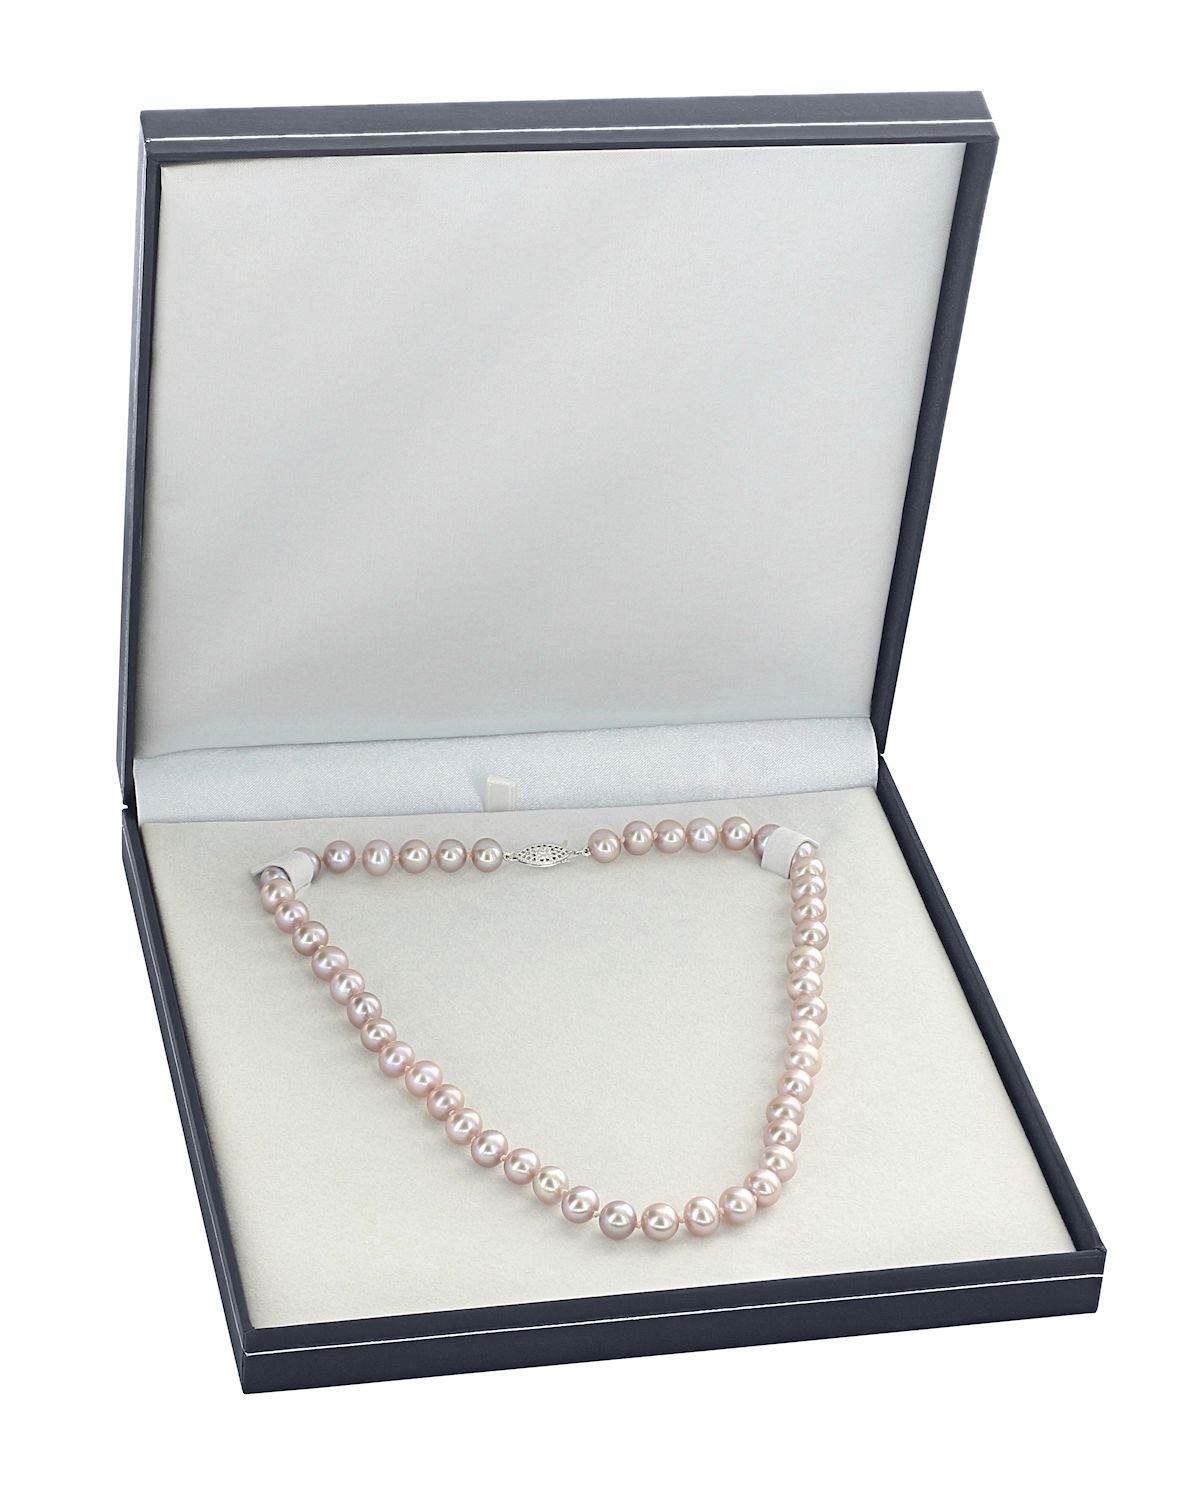 11.5-12.5mm Pink Freshwater Pearl Necklace - AAA Quality - Third Image